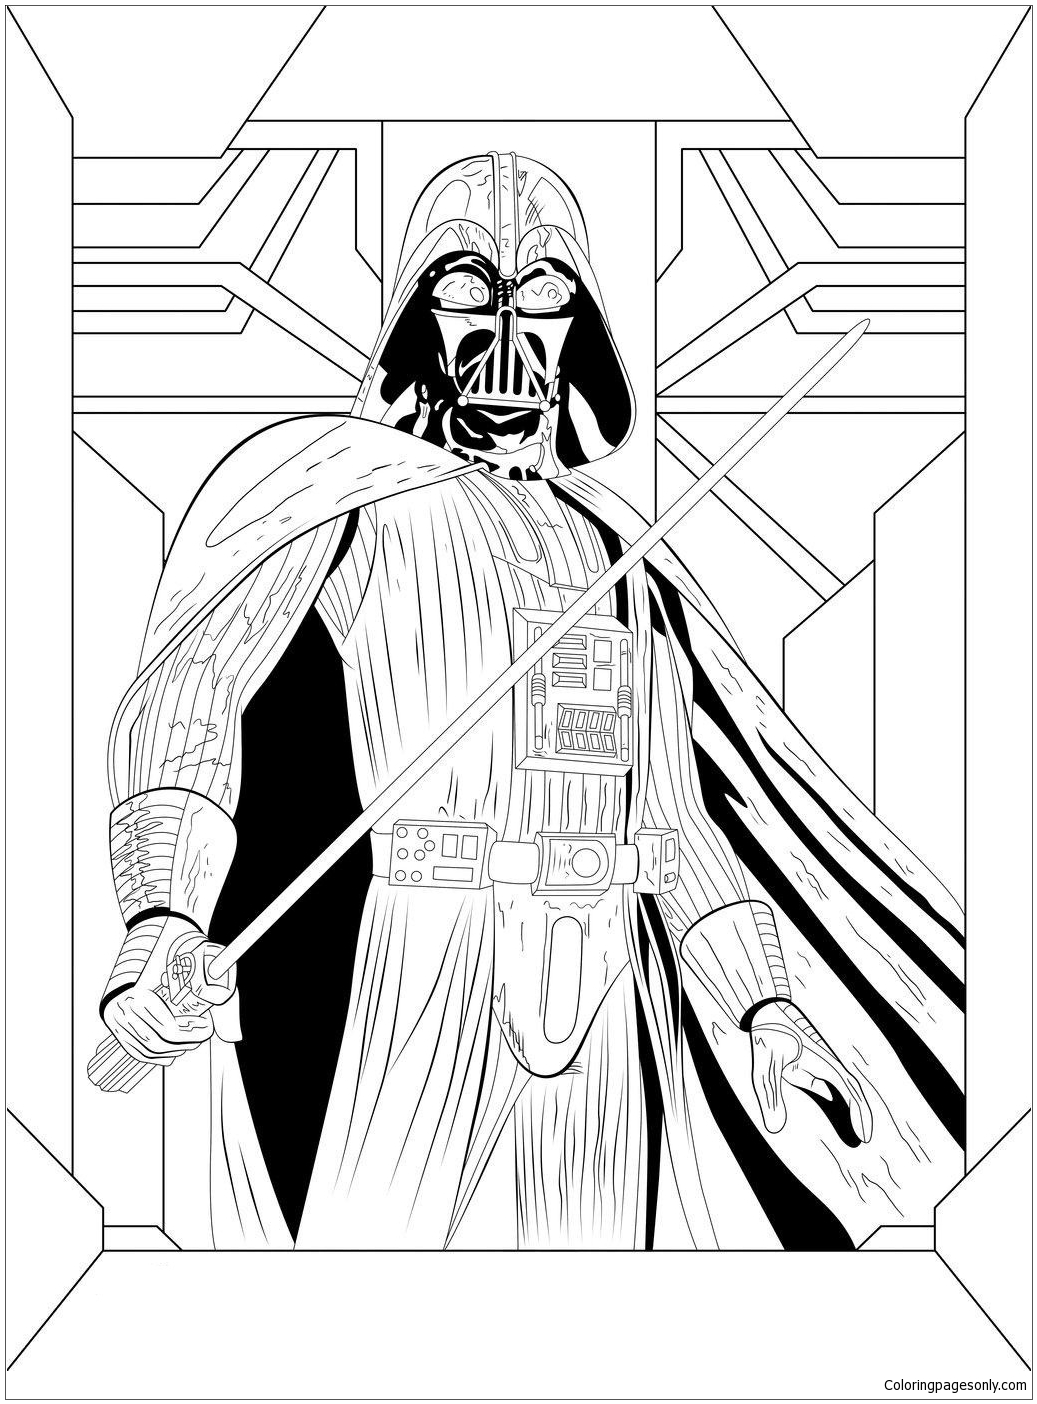 Darth Vader from Star Wars 2 from Star Wars Characters